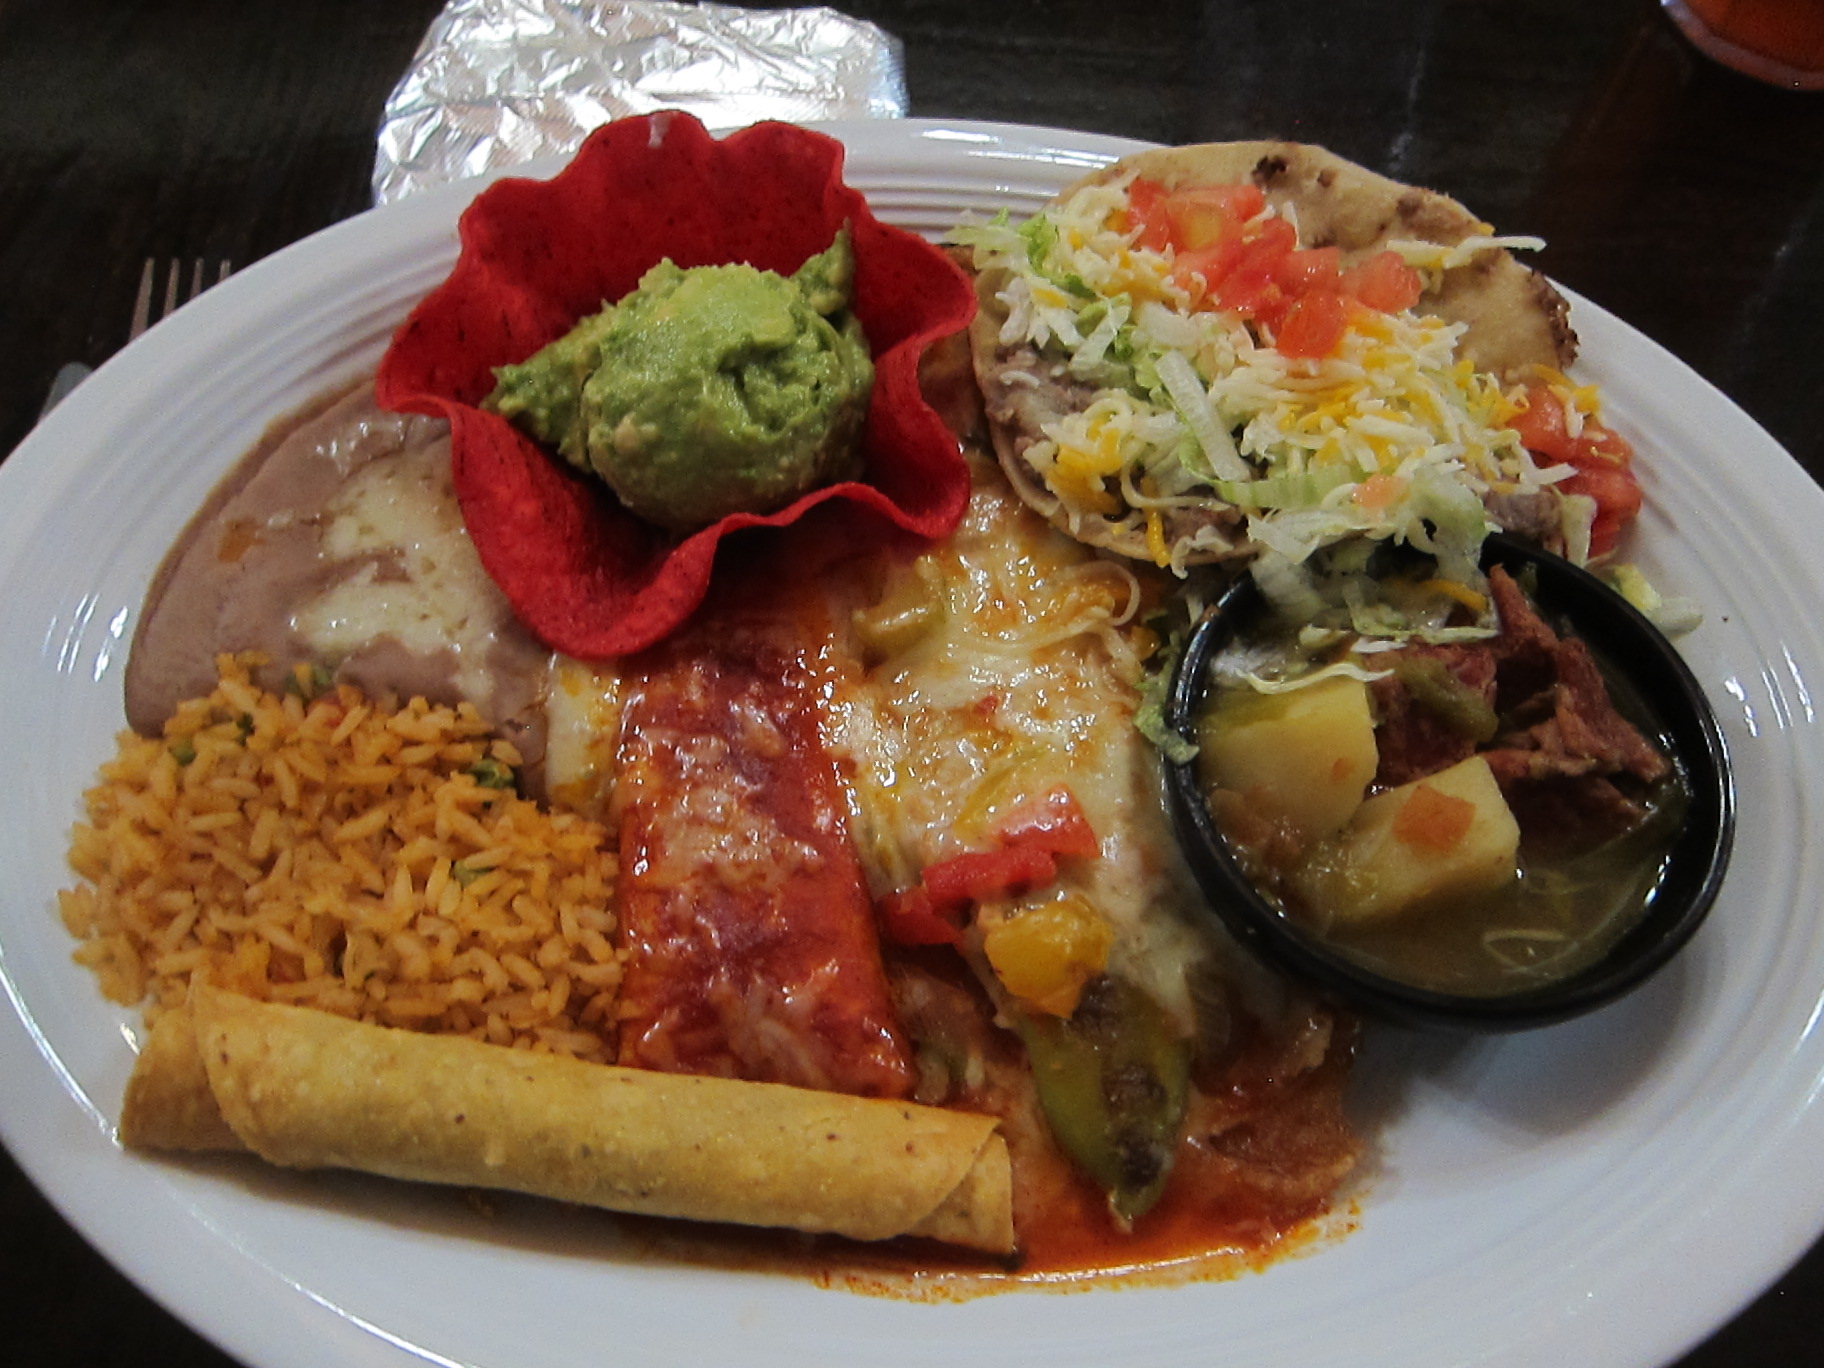 L&J's Mexican combination plate serves the iconic El Paso style Mexican food